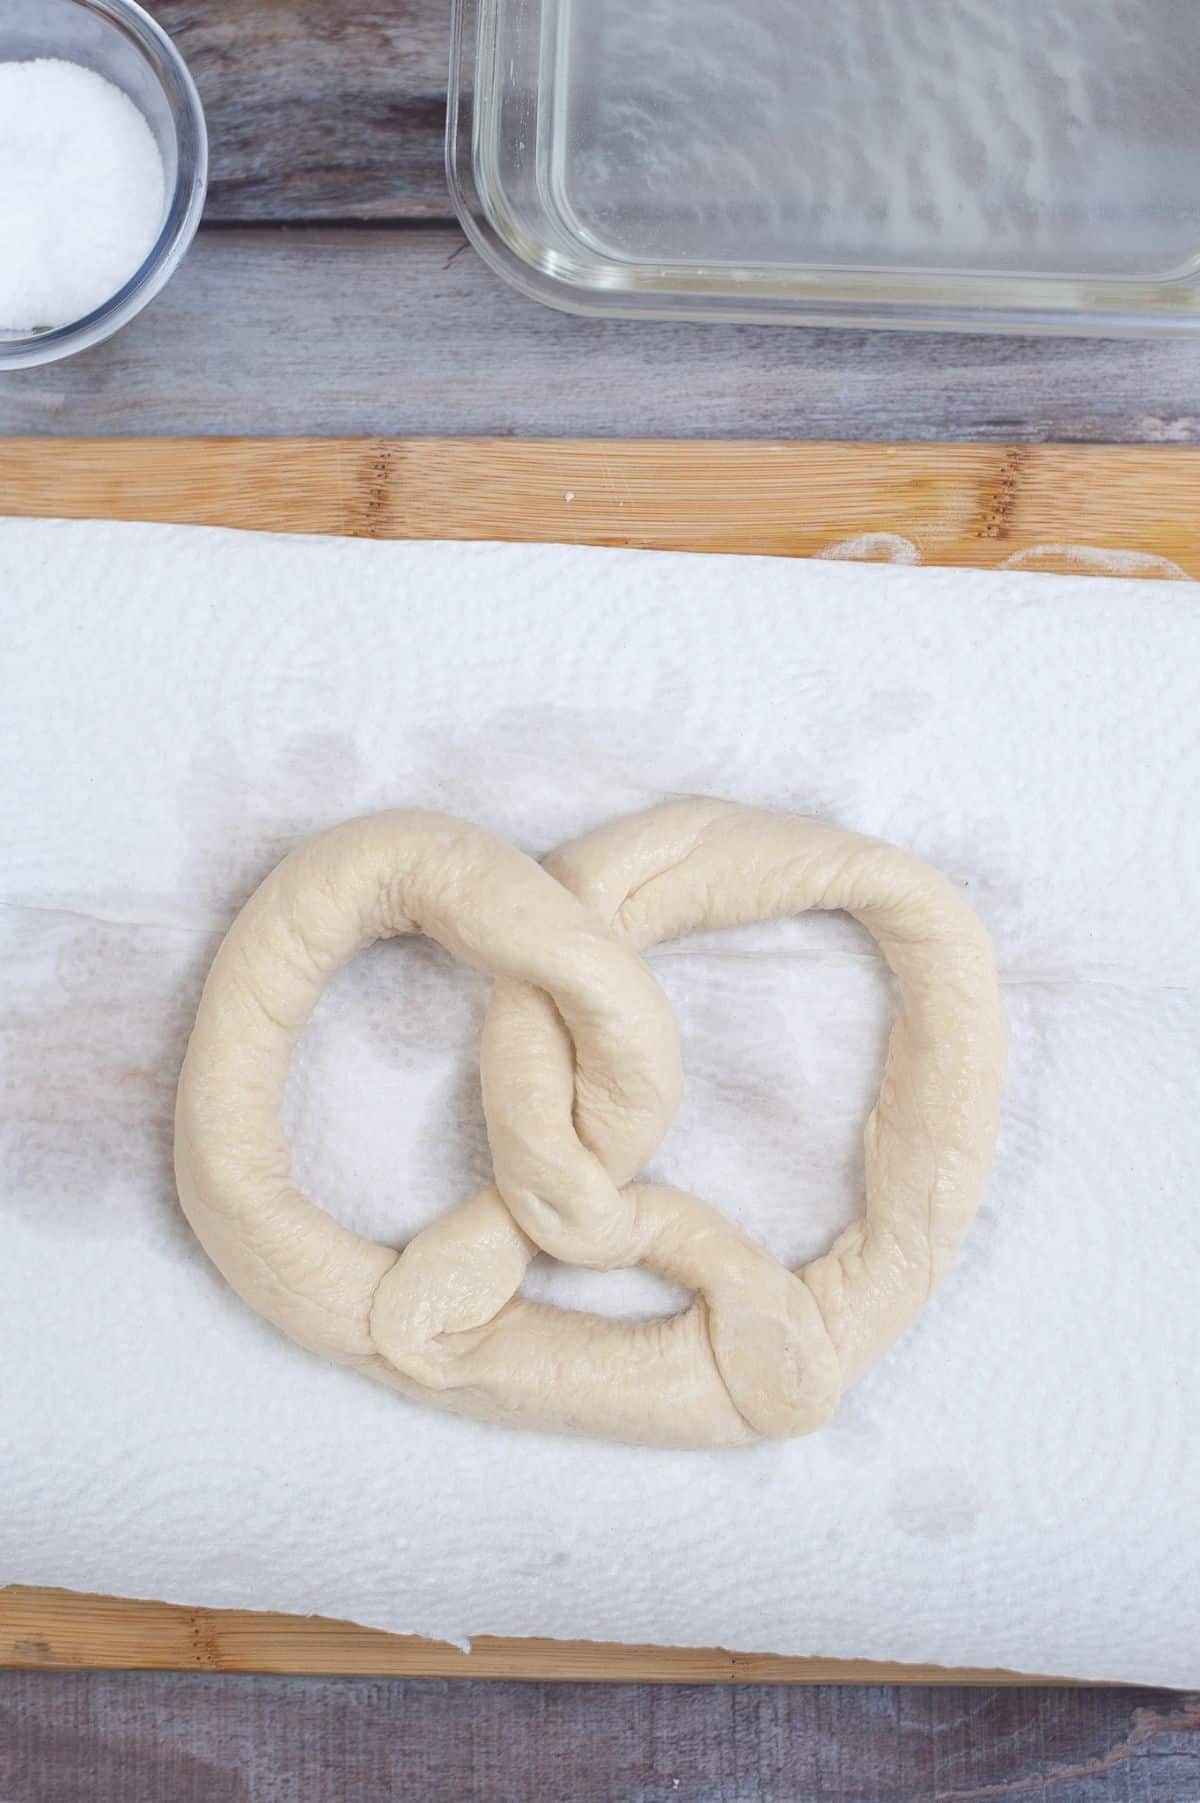 The pretzel is placed on the towel with salt and baking soda water on the side.